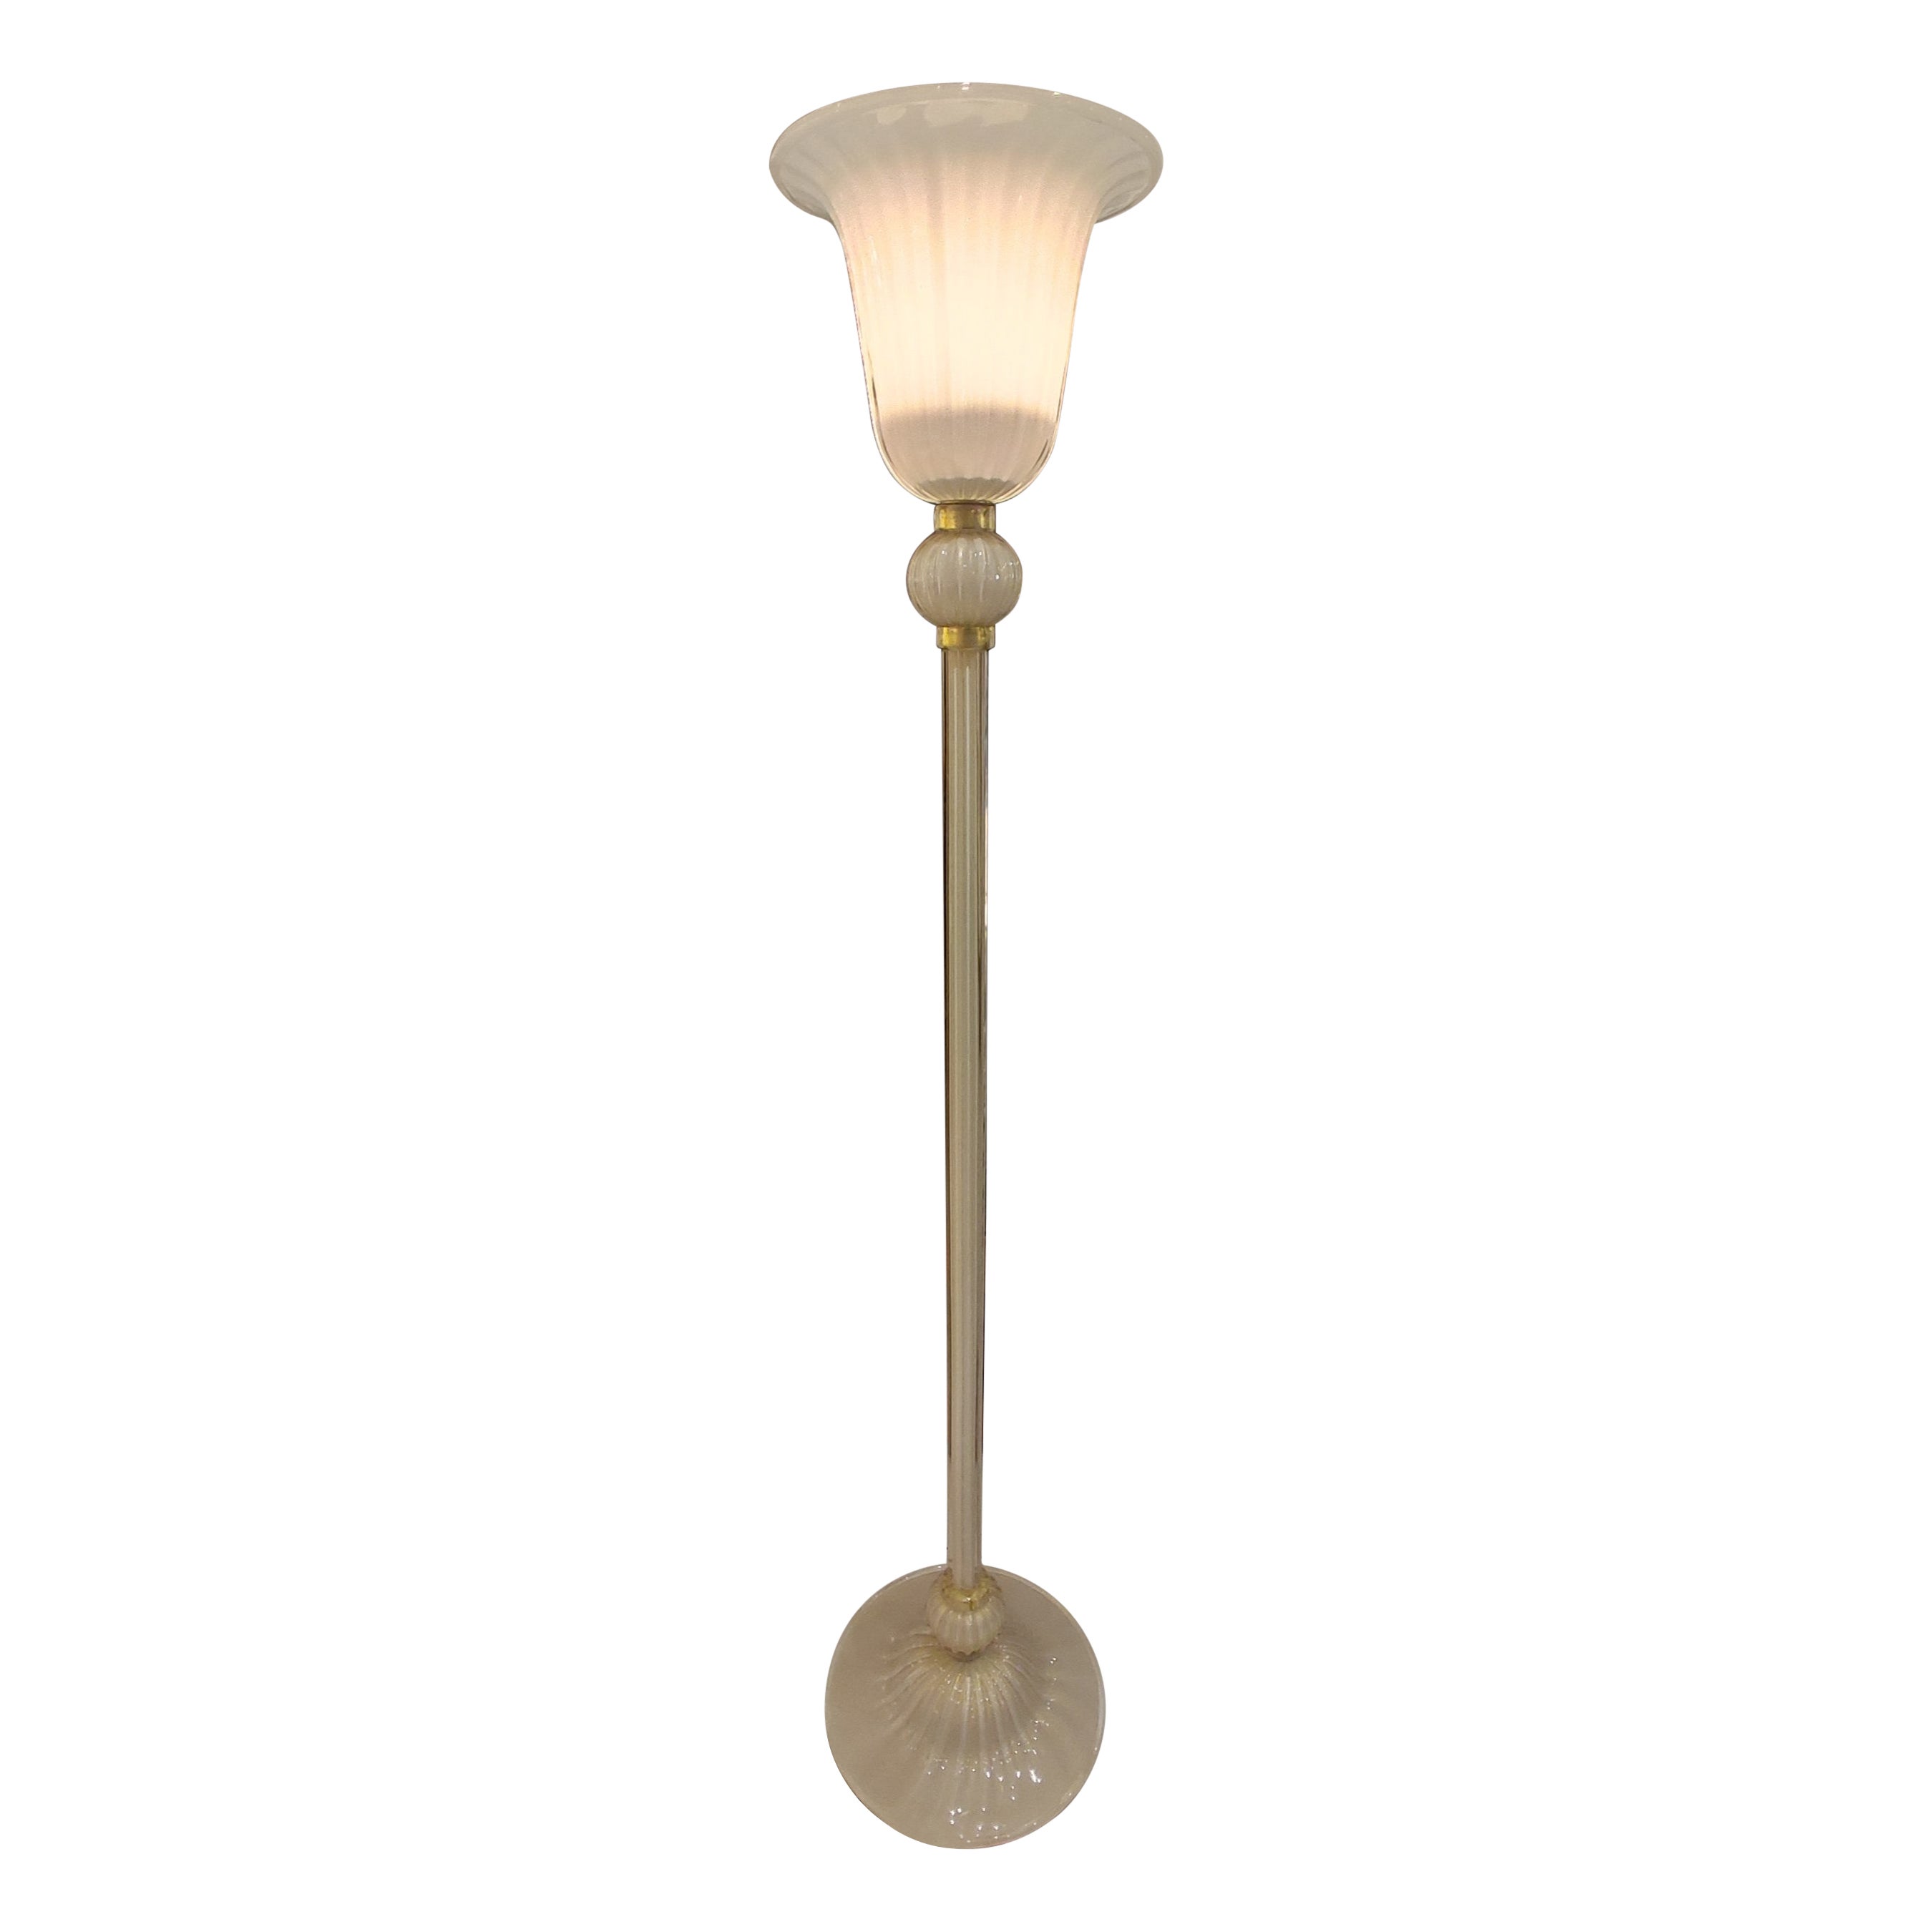 Floor Lamp in White Murano Glass with Gold Glitter Inserts